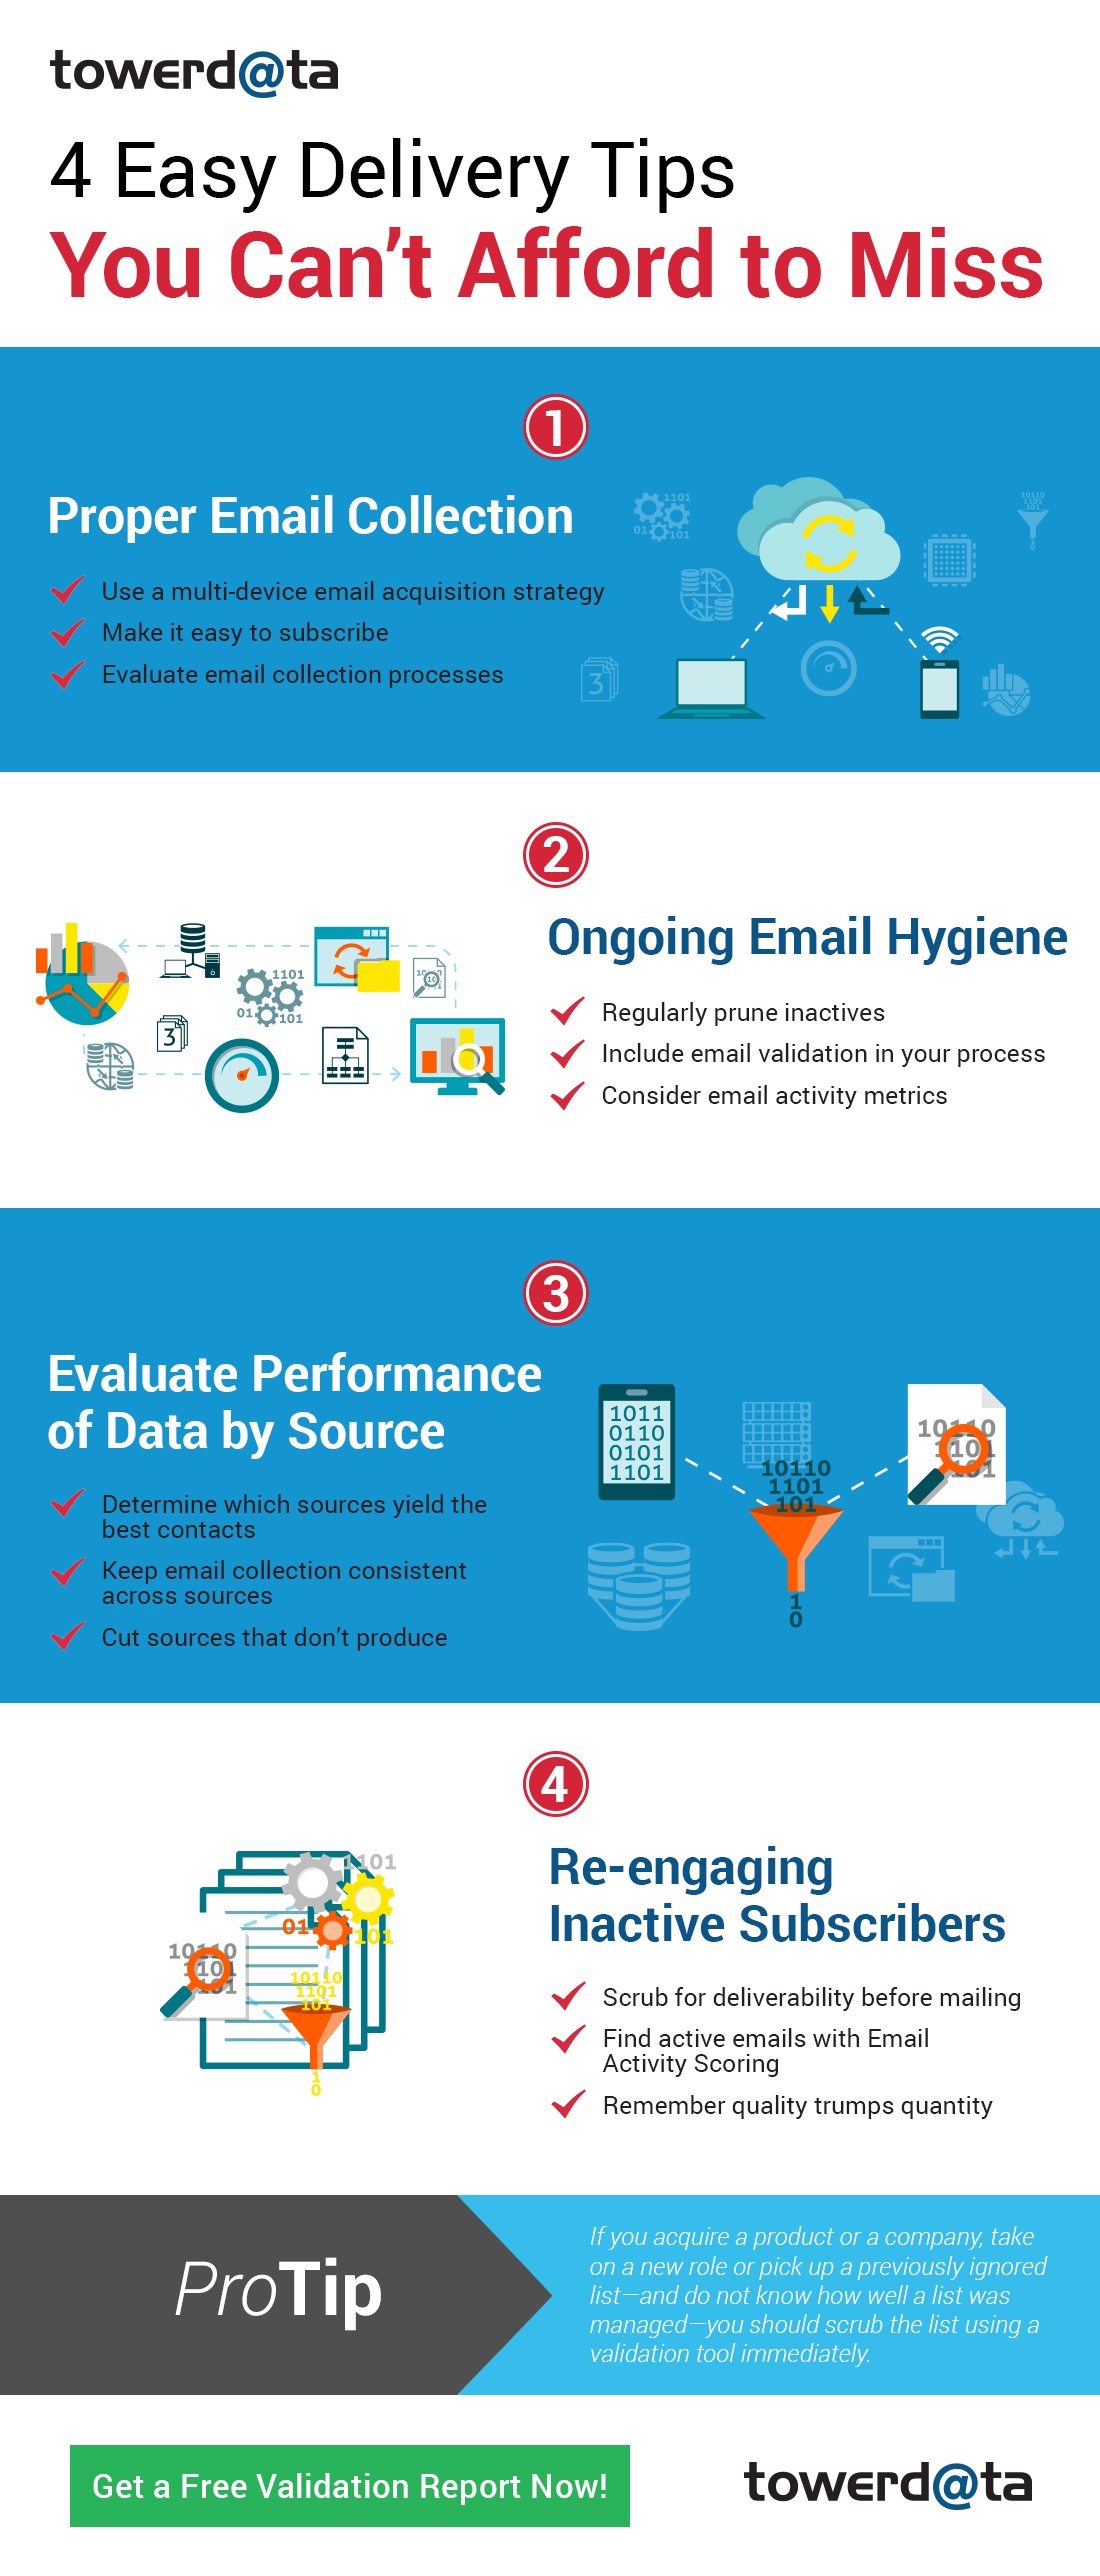 TowerData-Infographic_Email-Delivery.jpg